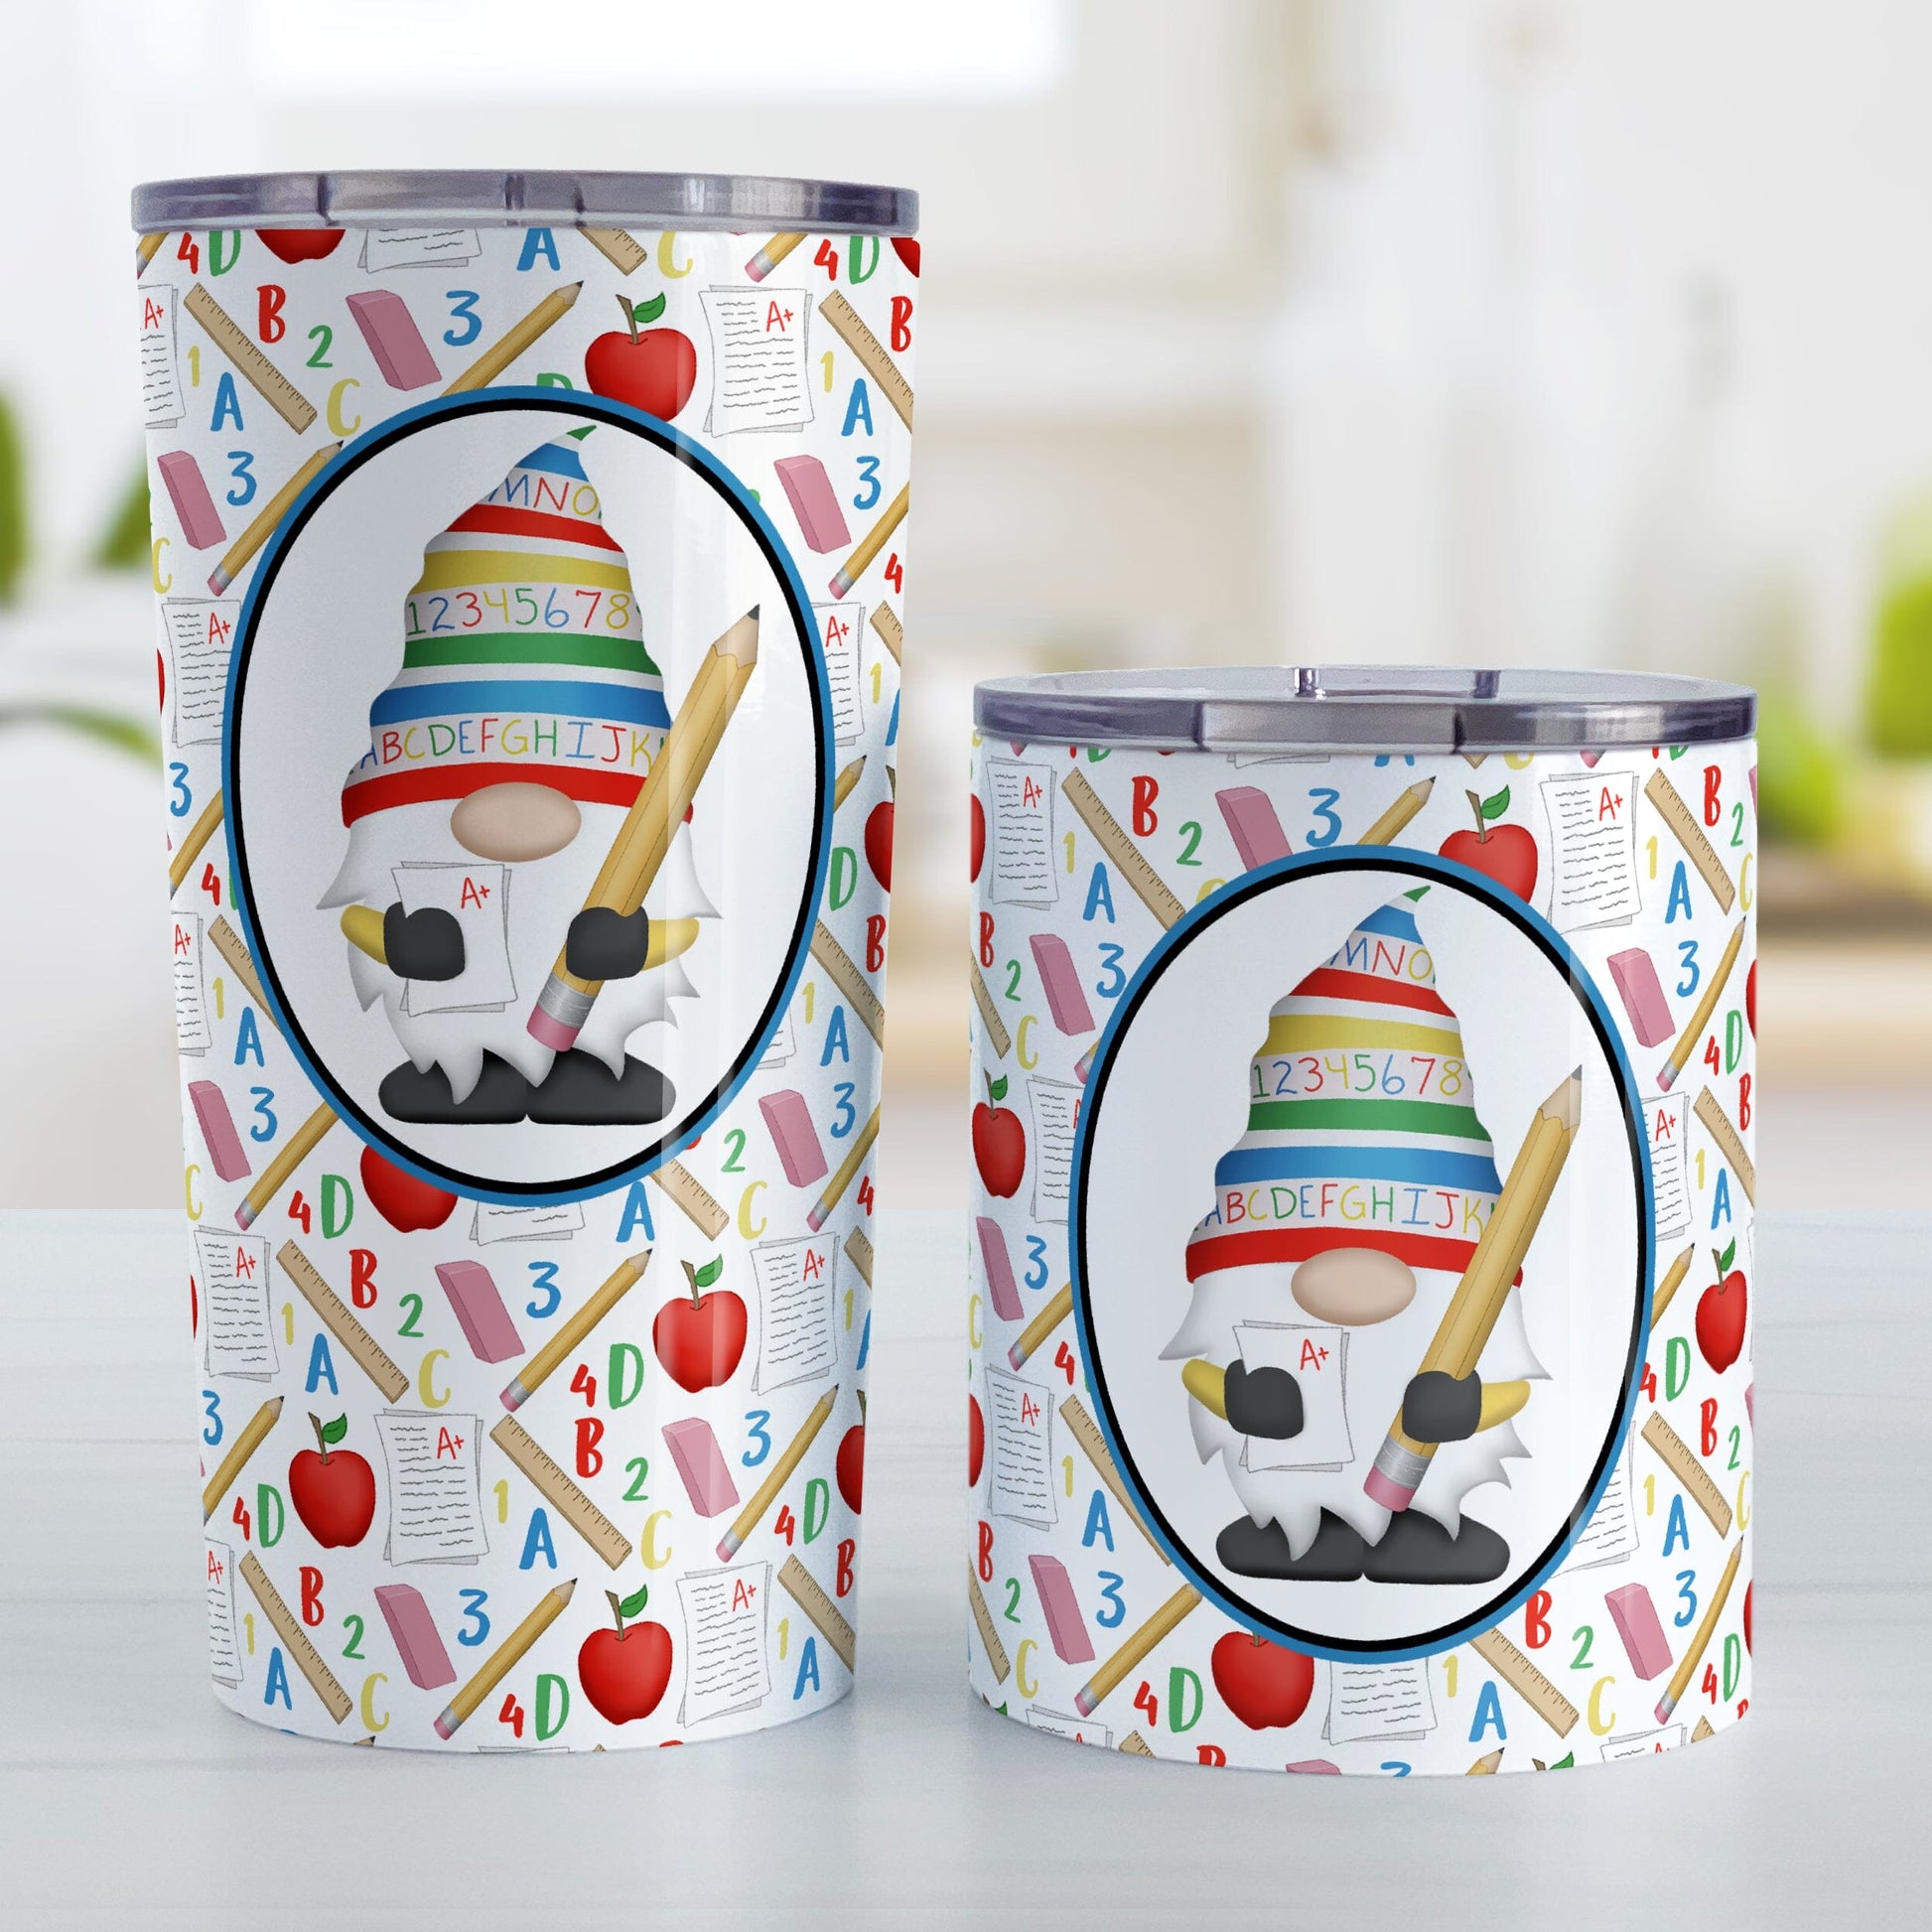 Teacher Gnome School Pattern Tumbler Cups (20oz or 10oz) at Amy's Coffee Mugs. Stainless steel tumbler cups designed with an illustration of an adorable gnome wearing a festive hat with numbers and letters in primary colors and holding a large oversized pencil and graded A+ paper inside an oval. This cute gnome oval is placed over a school-themed pattern that wraps around the cups with apples, rulers, erasers, graded papers, numbers, and letters.